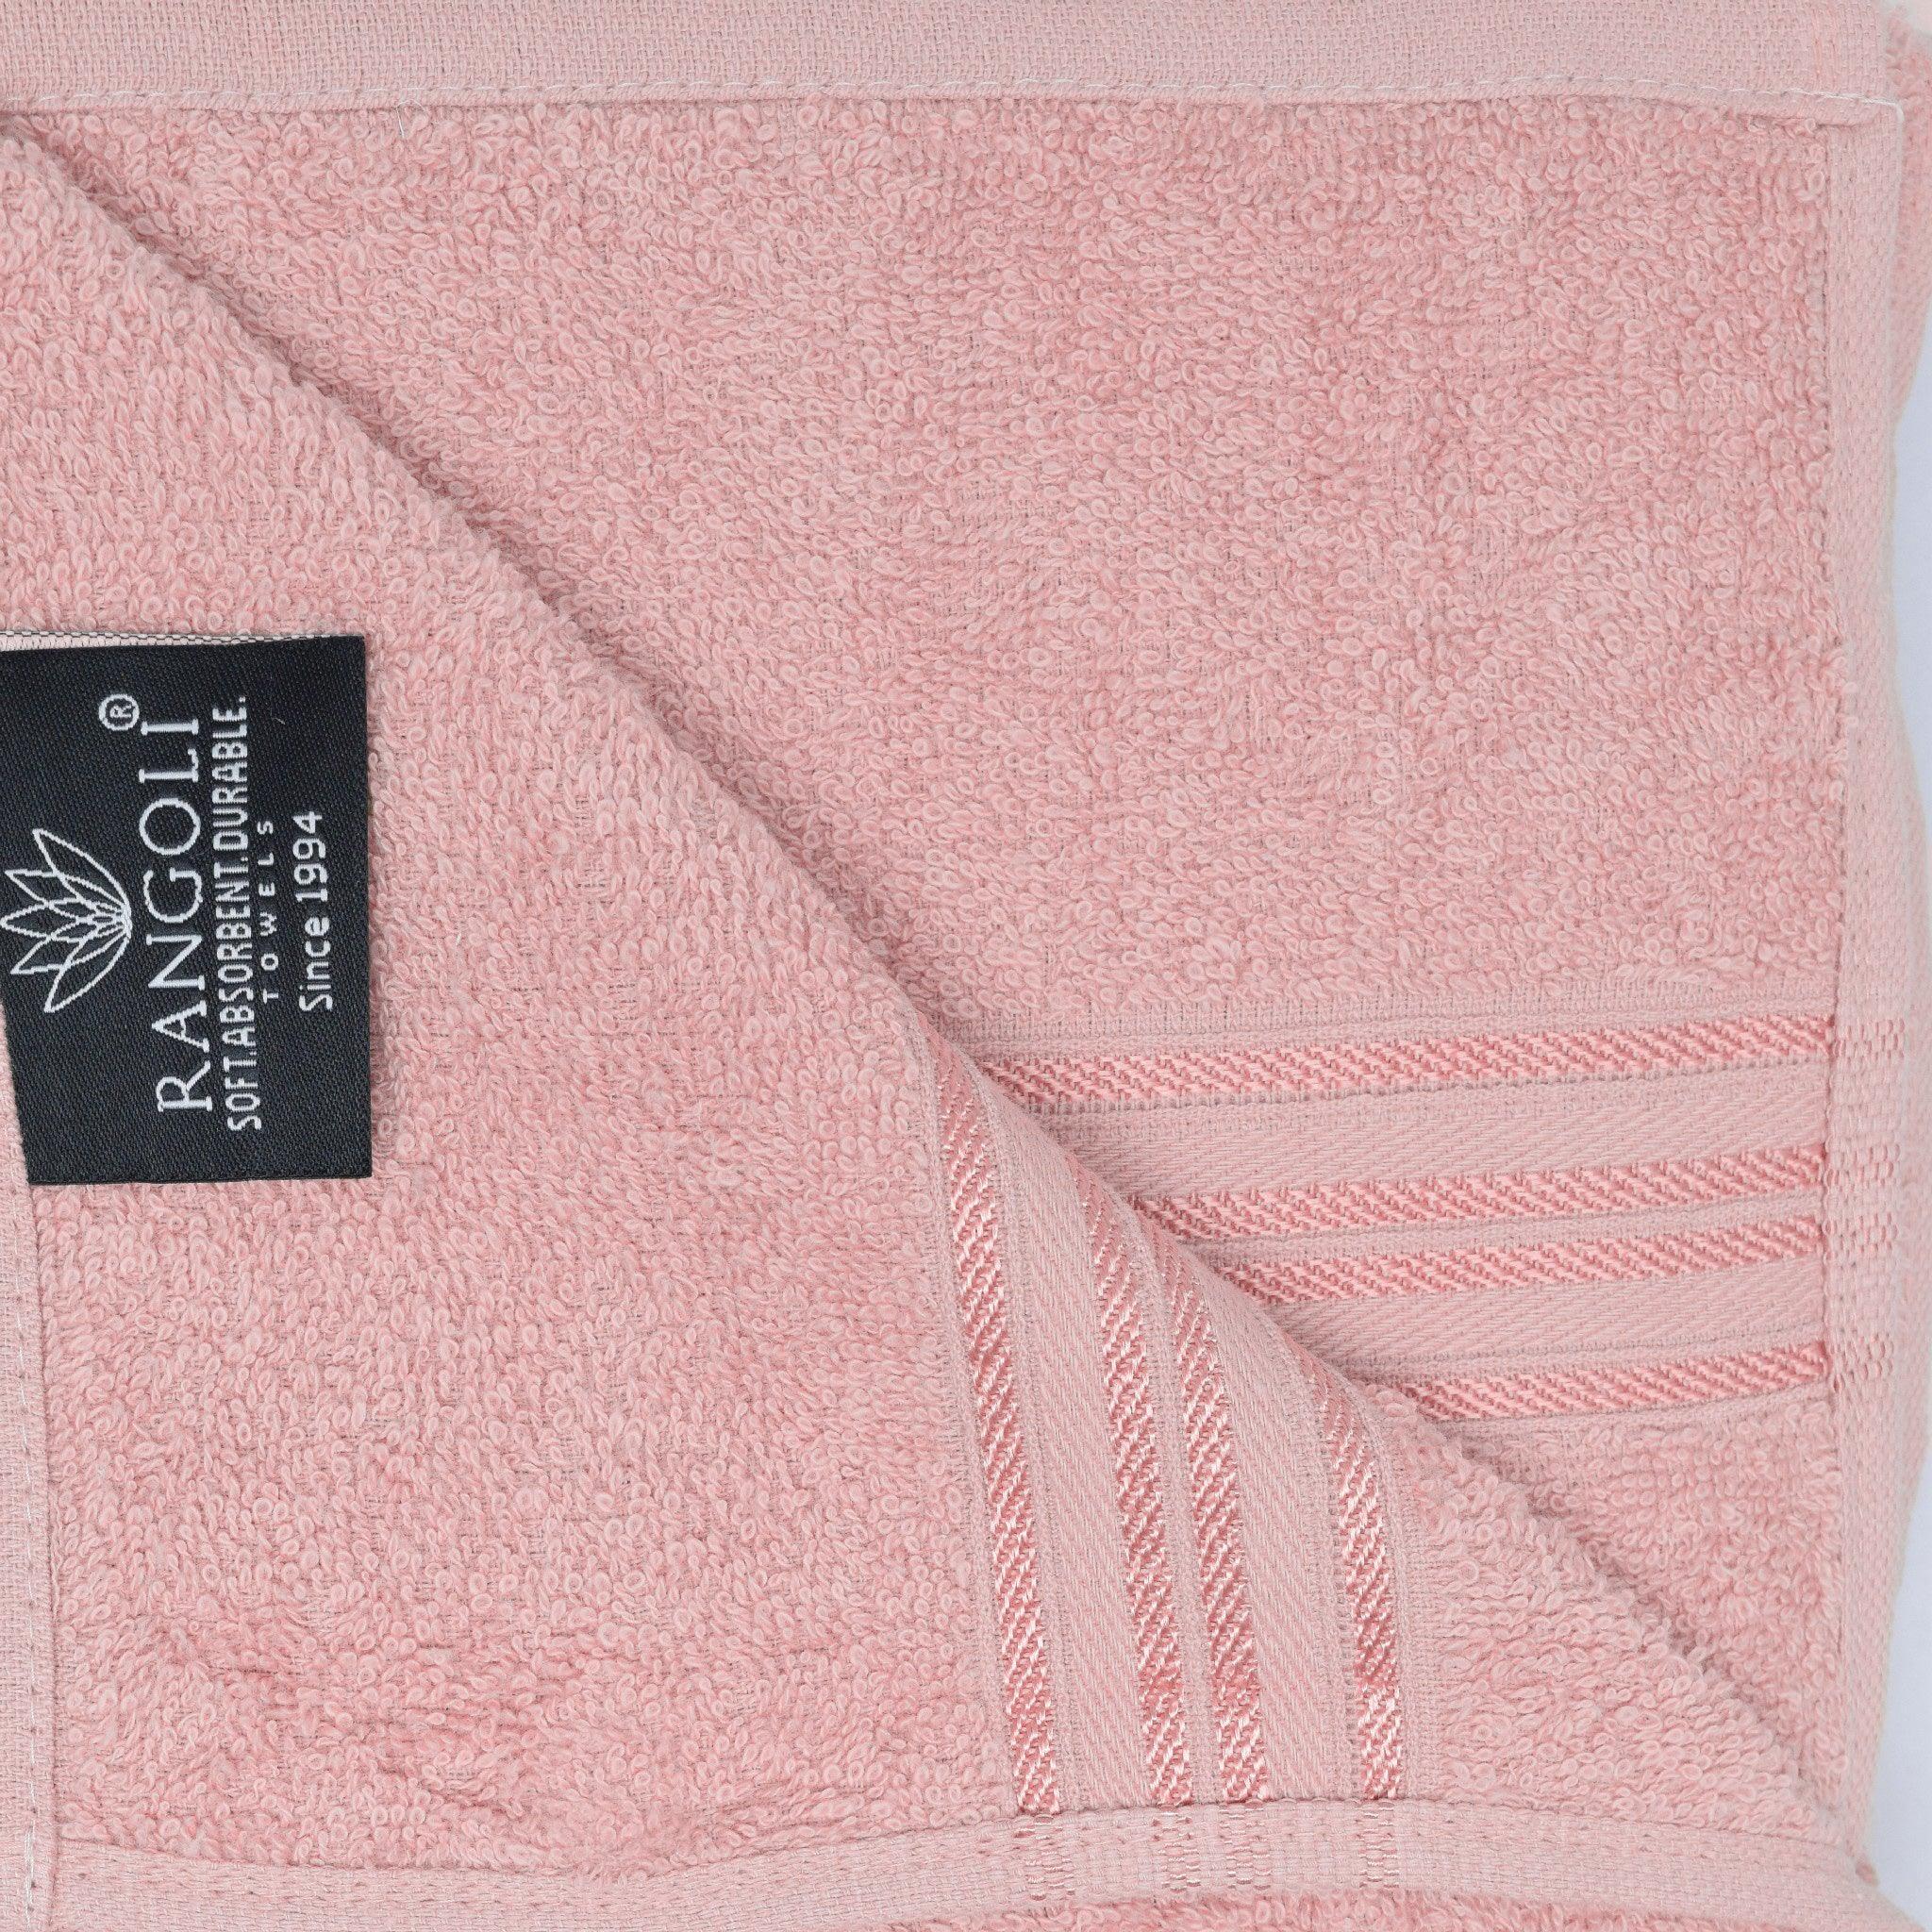 Super Comfy 100% Cotton Bath Towel | Ultra Soft, Lightweight and Quick Drying Towels